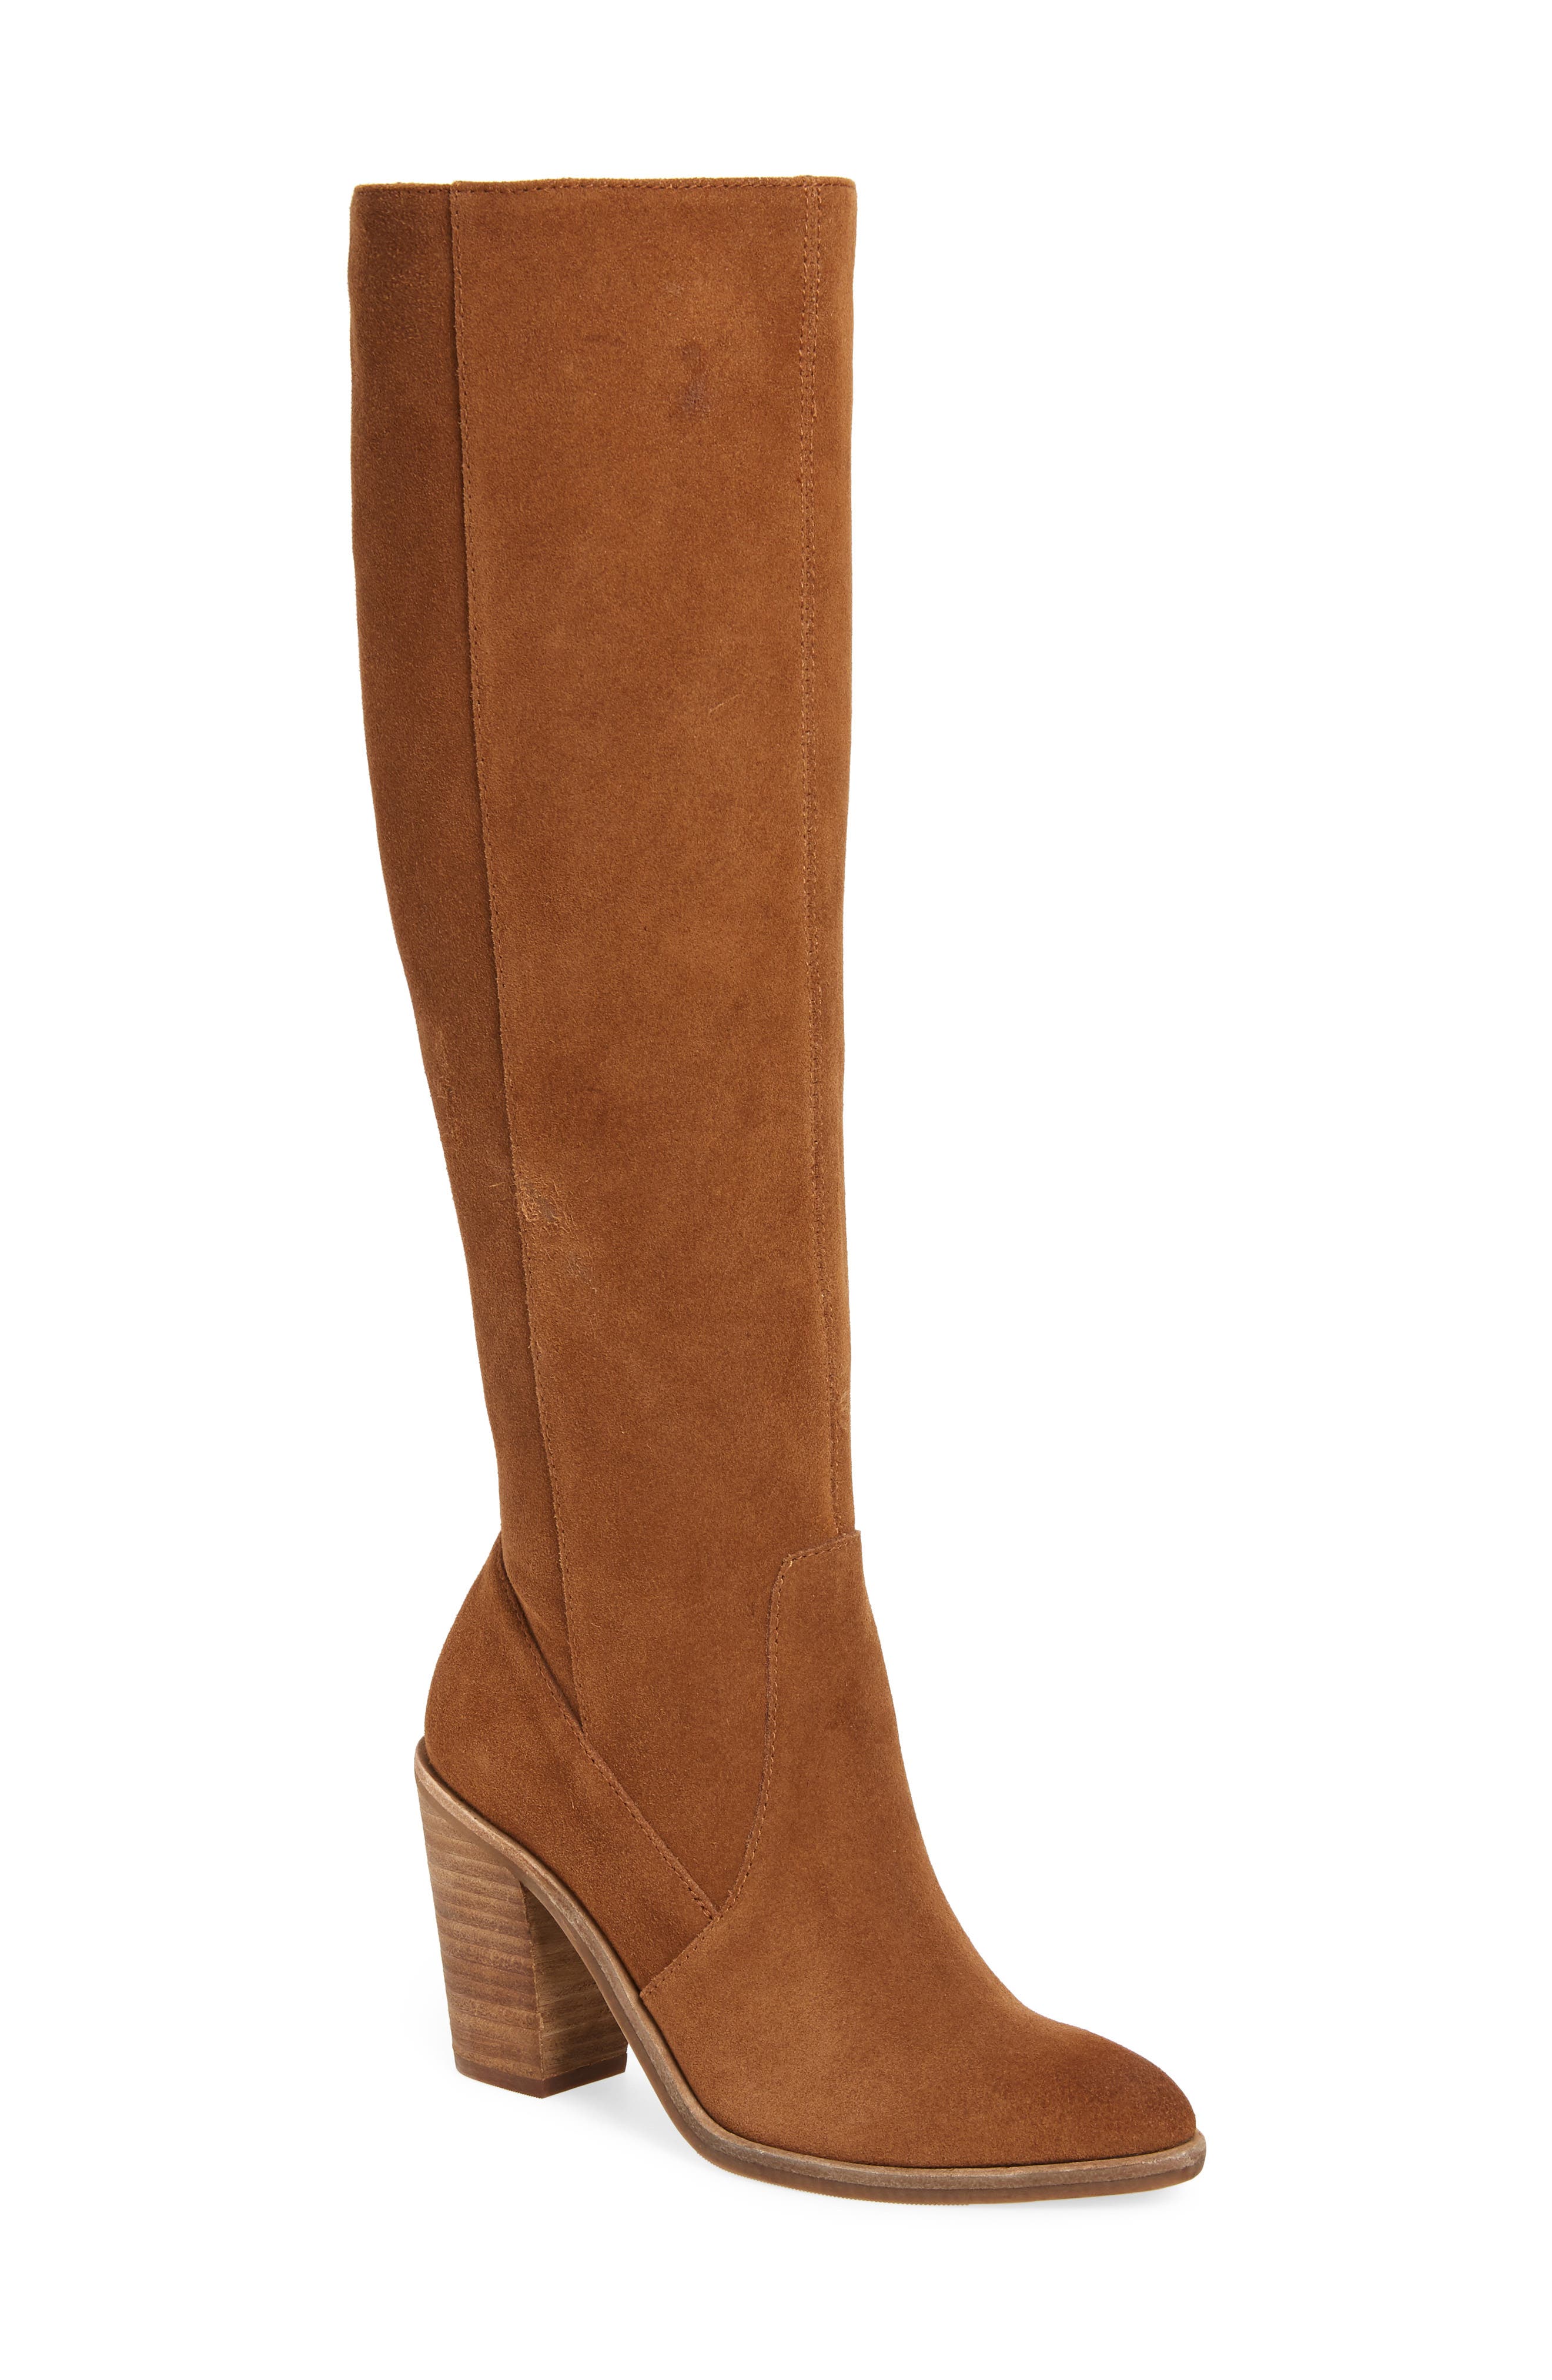 treasure and bond boots nordstrom